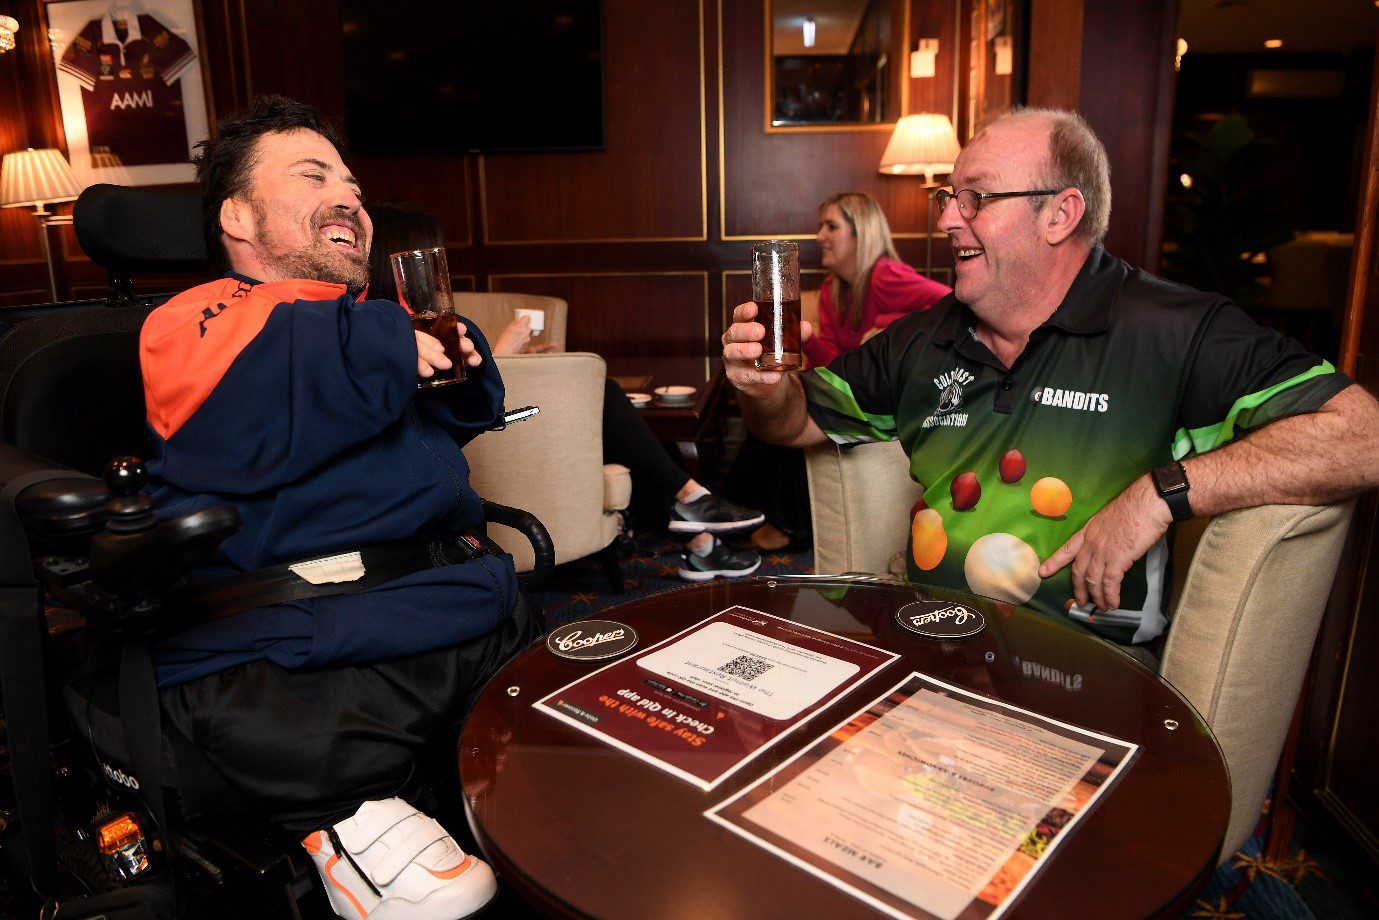 Two men having a drink. The man on the left is in a wheel chair and wearing a blue and orange shirt and the man on the right is wearing a black and green branded shirt. They are in a bar lunge with a table in front of them and are both laughing.